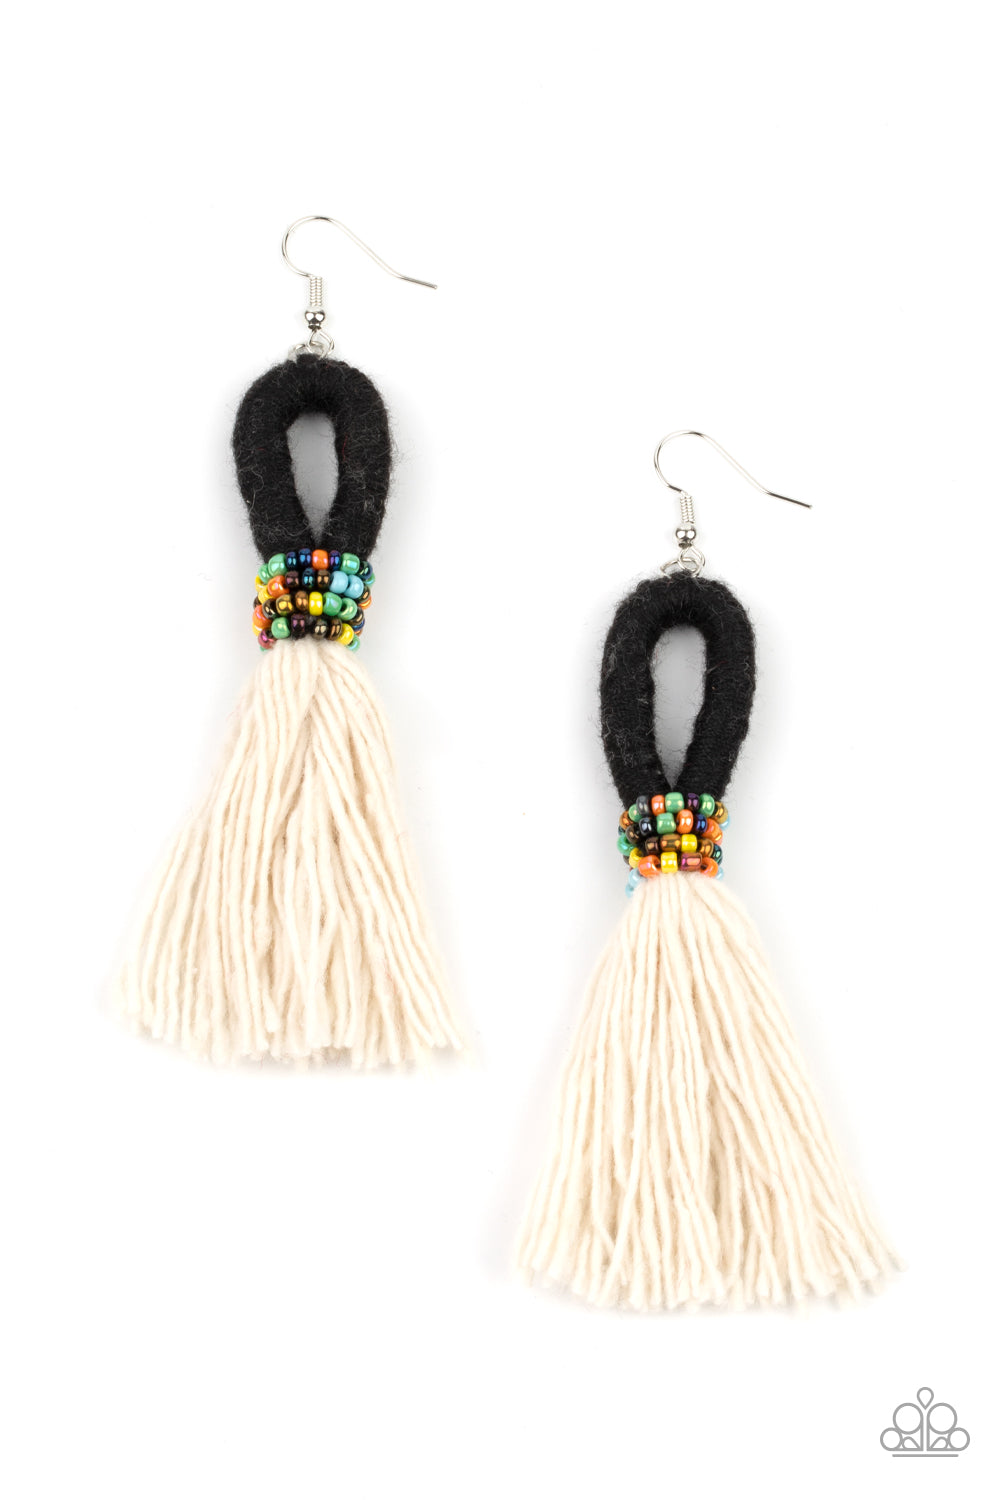 The Dustup Black Earring - Paparazzi Accessories  A tassel of soft white cotton fans out under rows of brightly colored seed beads. Anchored by a loop of jet black floss, the eye-catching style swings from the ear for a show-stopping statement. Earring attaches to a standard fishhook fitting.  All Paparazzi Accessories are lead free and nickel free!  Sold as one pair of earrings.